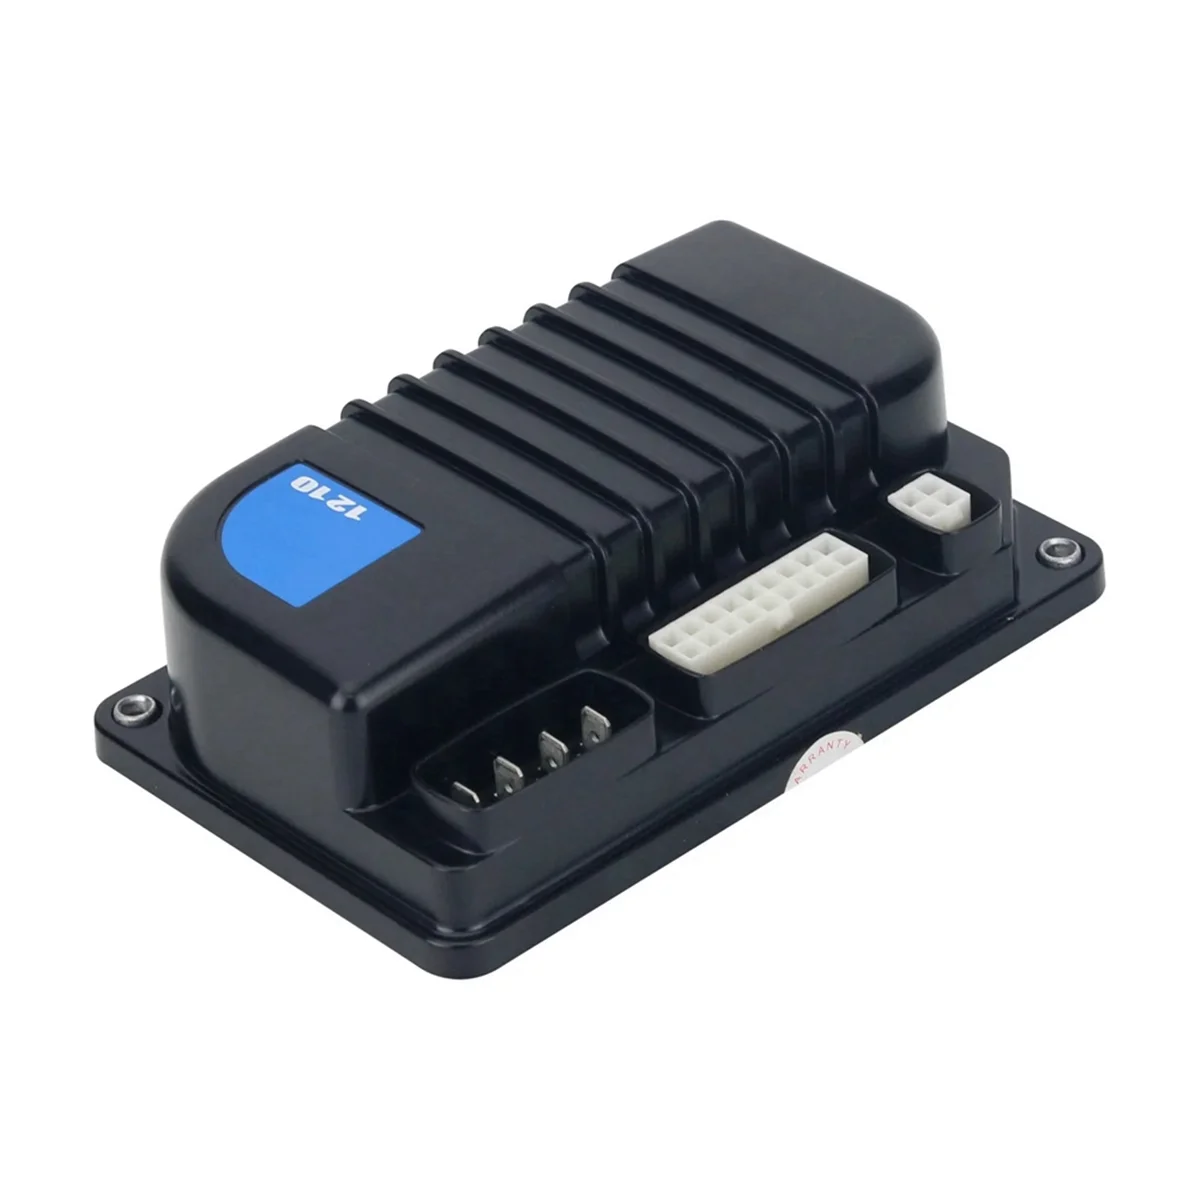 

1210-2401 24V 70A Permanent Magnet DC Motor Controller for Industrial Applications